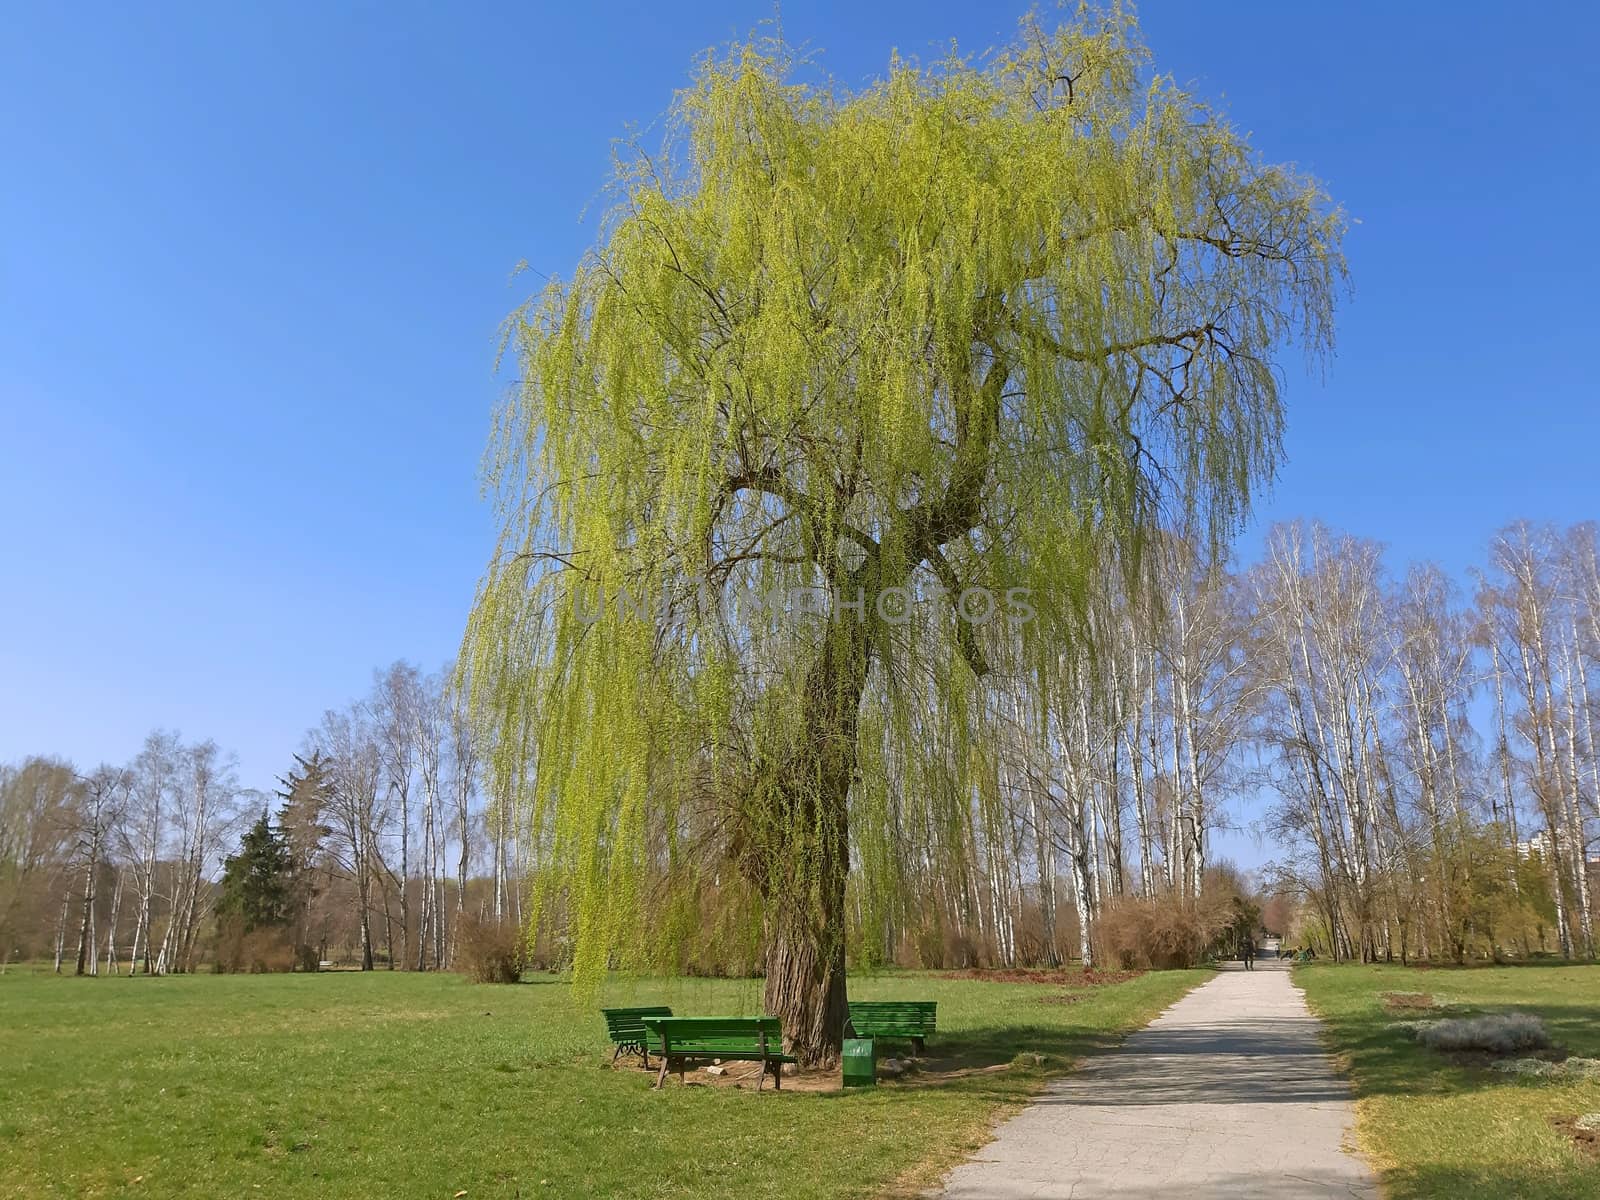 A willow tree with new fresh leaves in the spring.